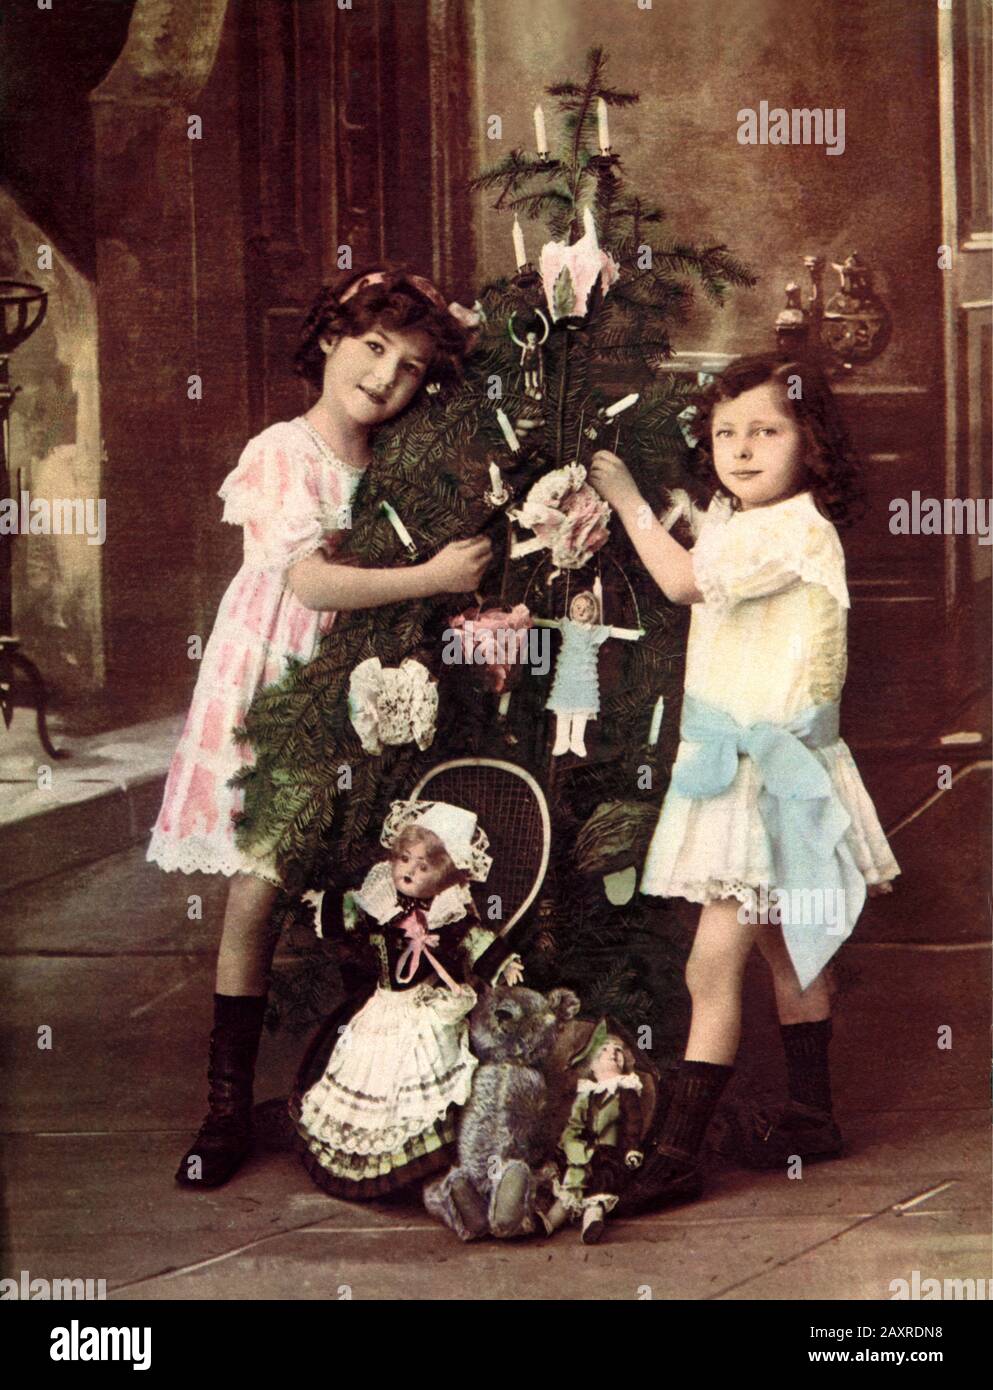 Buon Natale History.1900 Ca France Two Little Boy And Girl In Christmas Time Near A Xmas Tress With